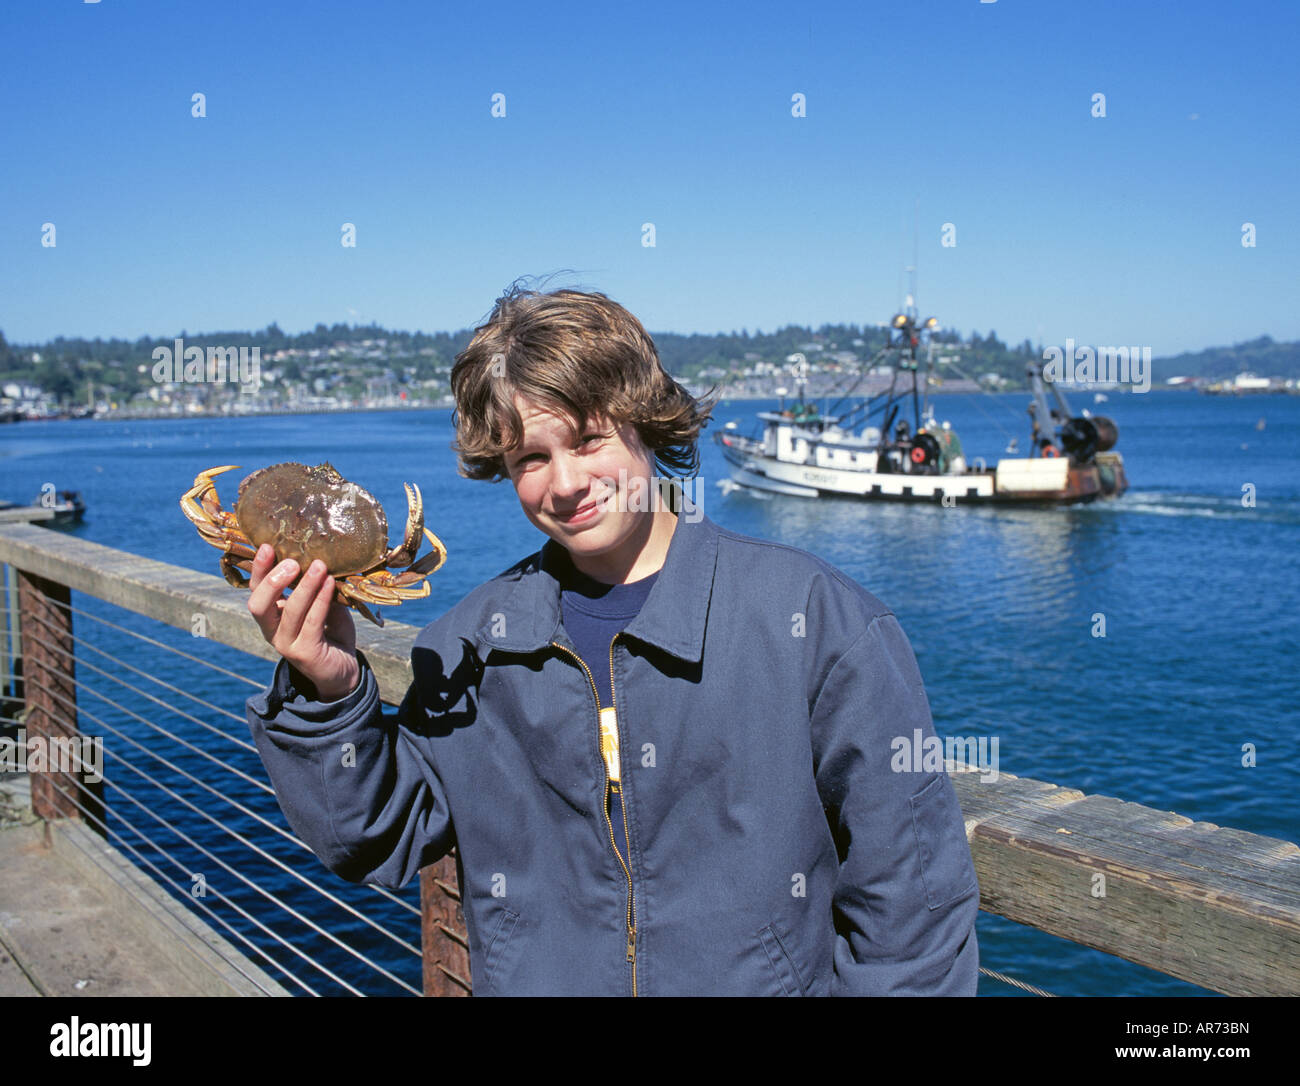 A young boy fishes for dungeness crab off the public wharf in downtown Newport Oregon Stock Photo